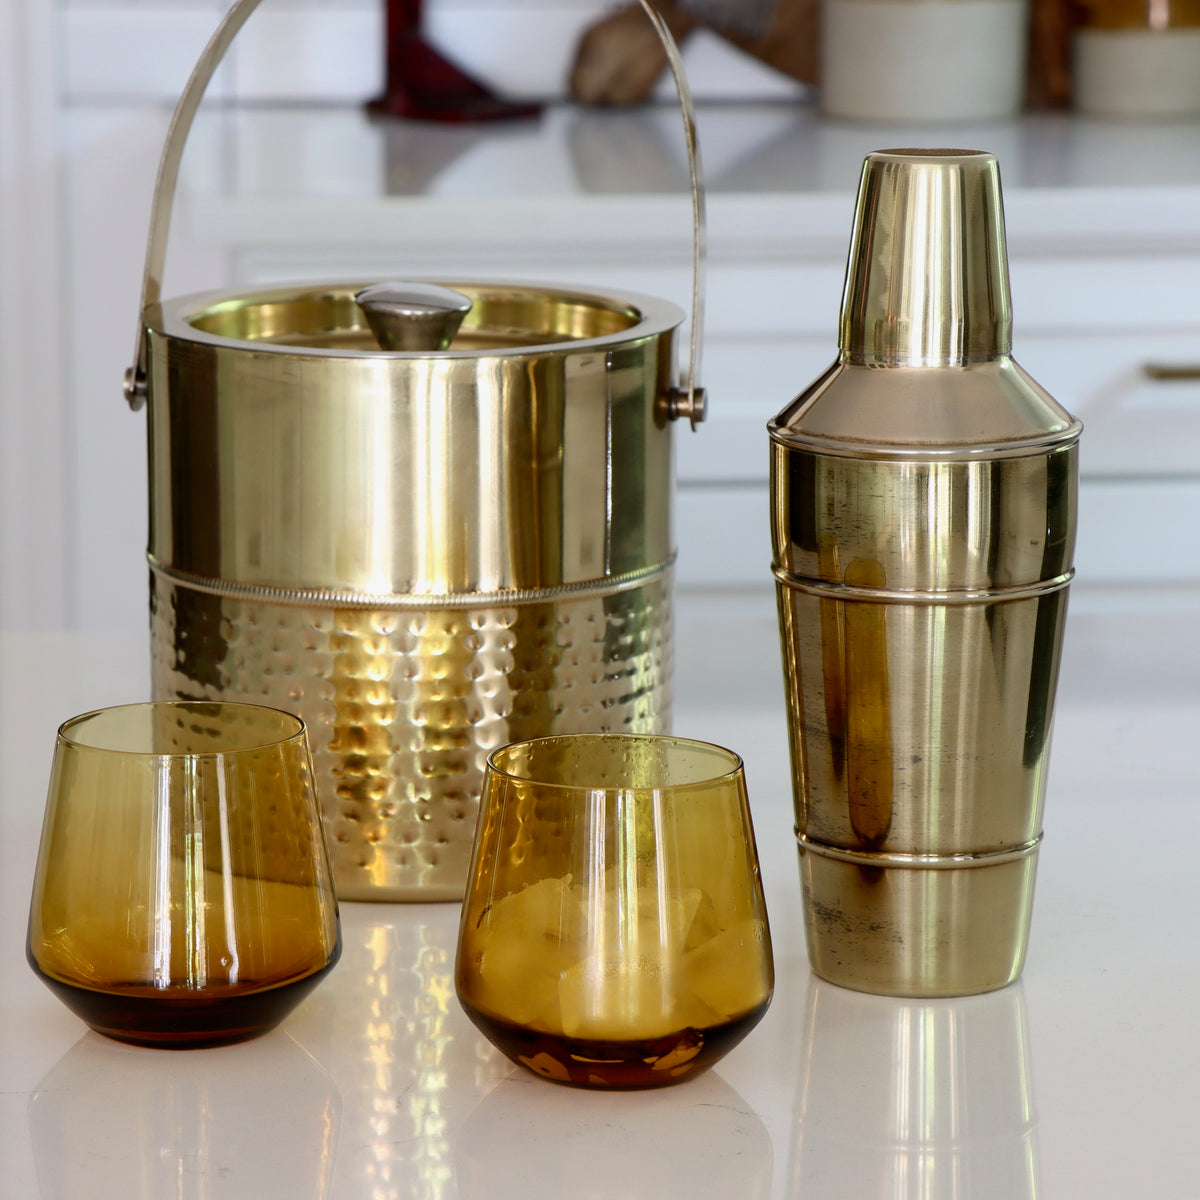 Oro Brass Finished Stainless Steel Cocktail Shaker - Holistic Habitat 